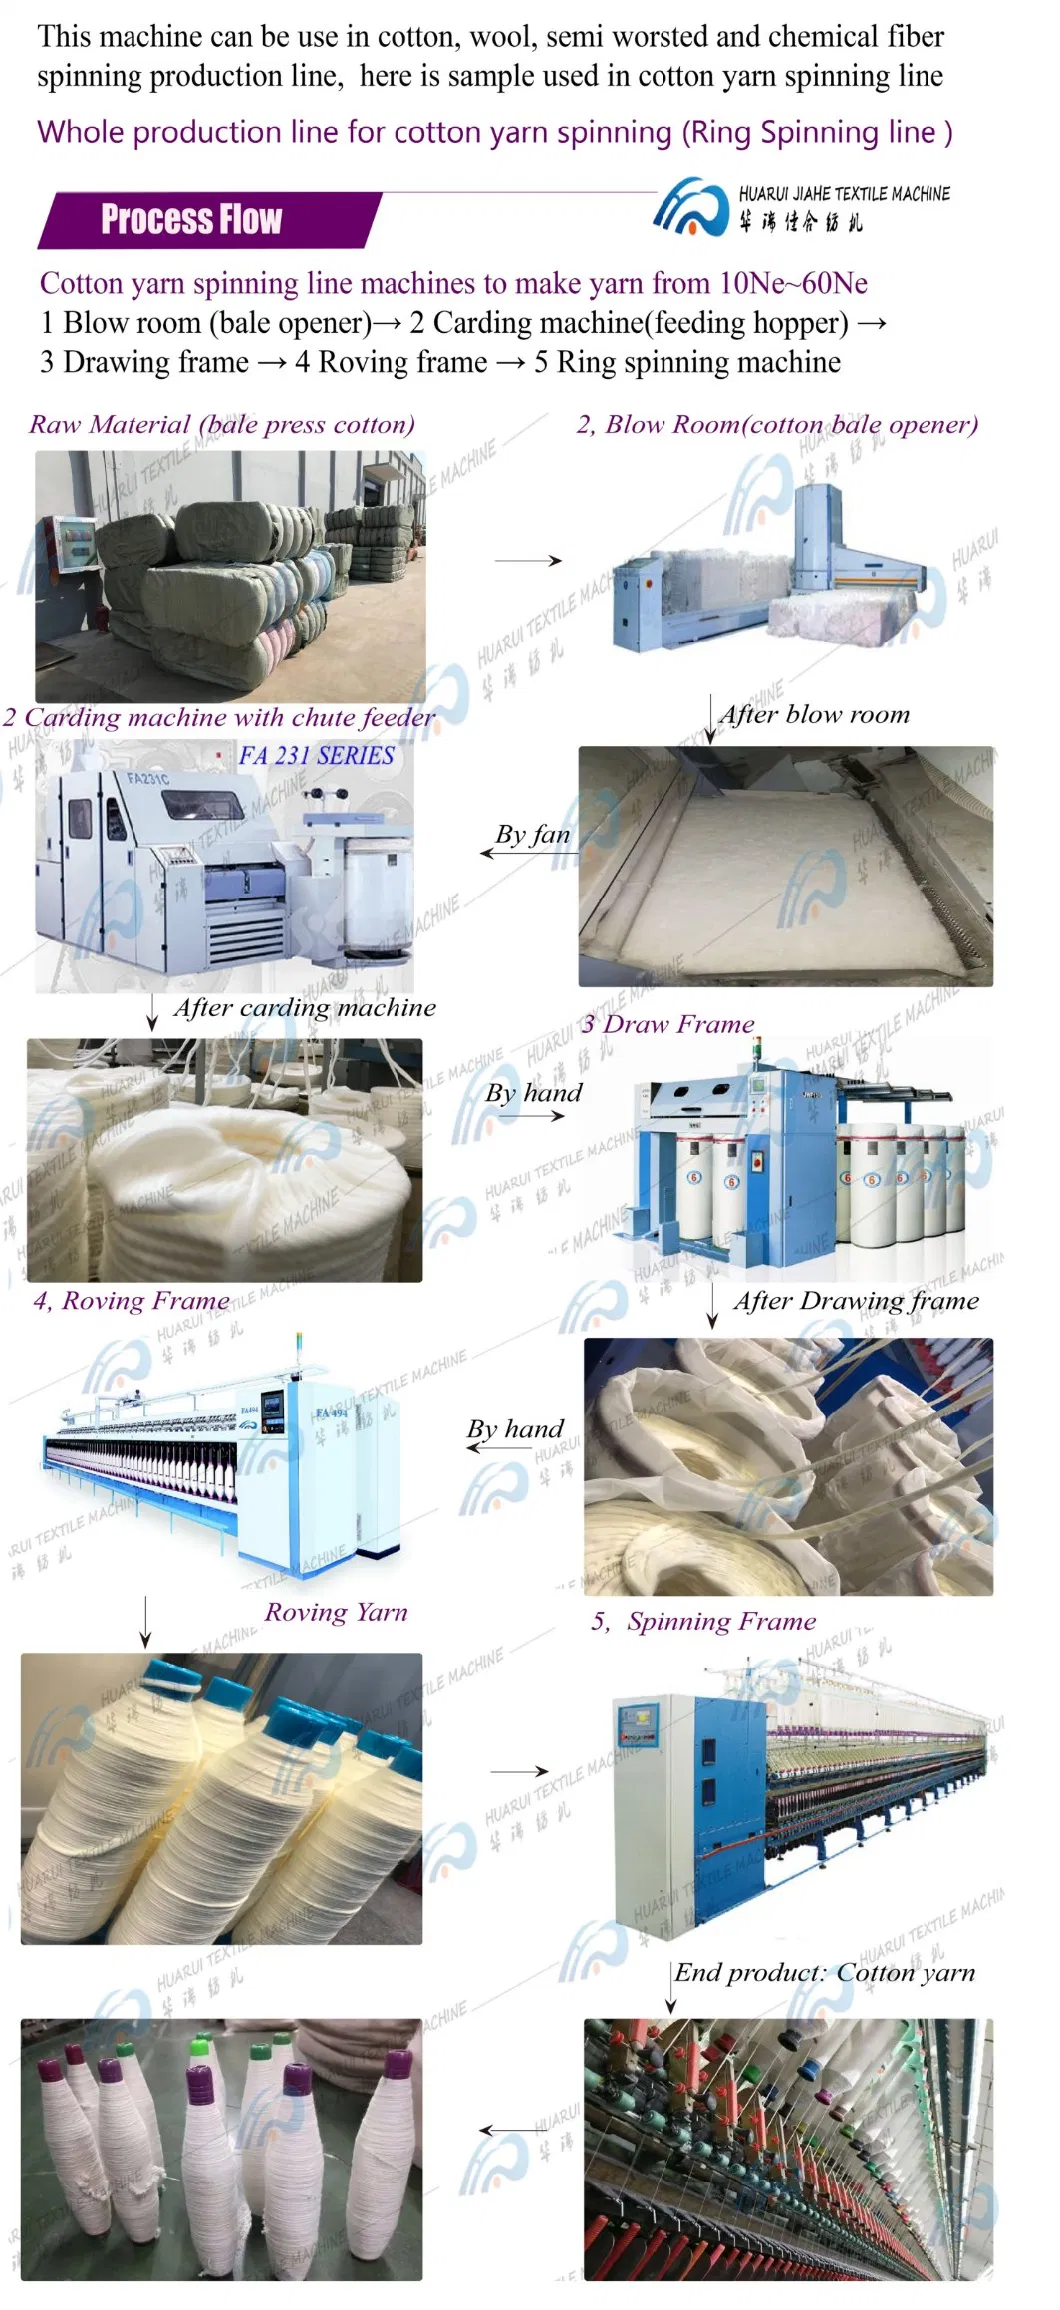 New Design Wool Dyeing Machine Ce Certificate with Stainless Steel Pipelines One Tank Garment 100kg Cheese Dyeing Machine with Long-Term Service